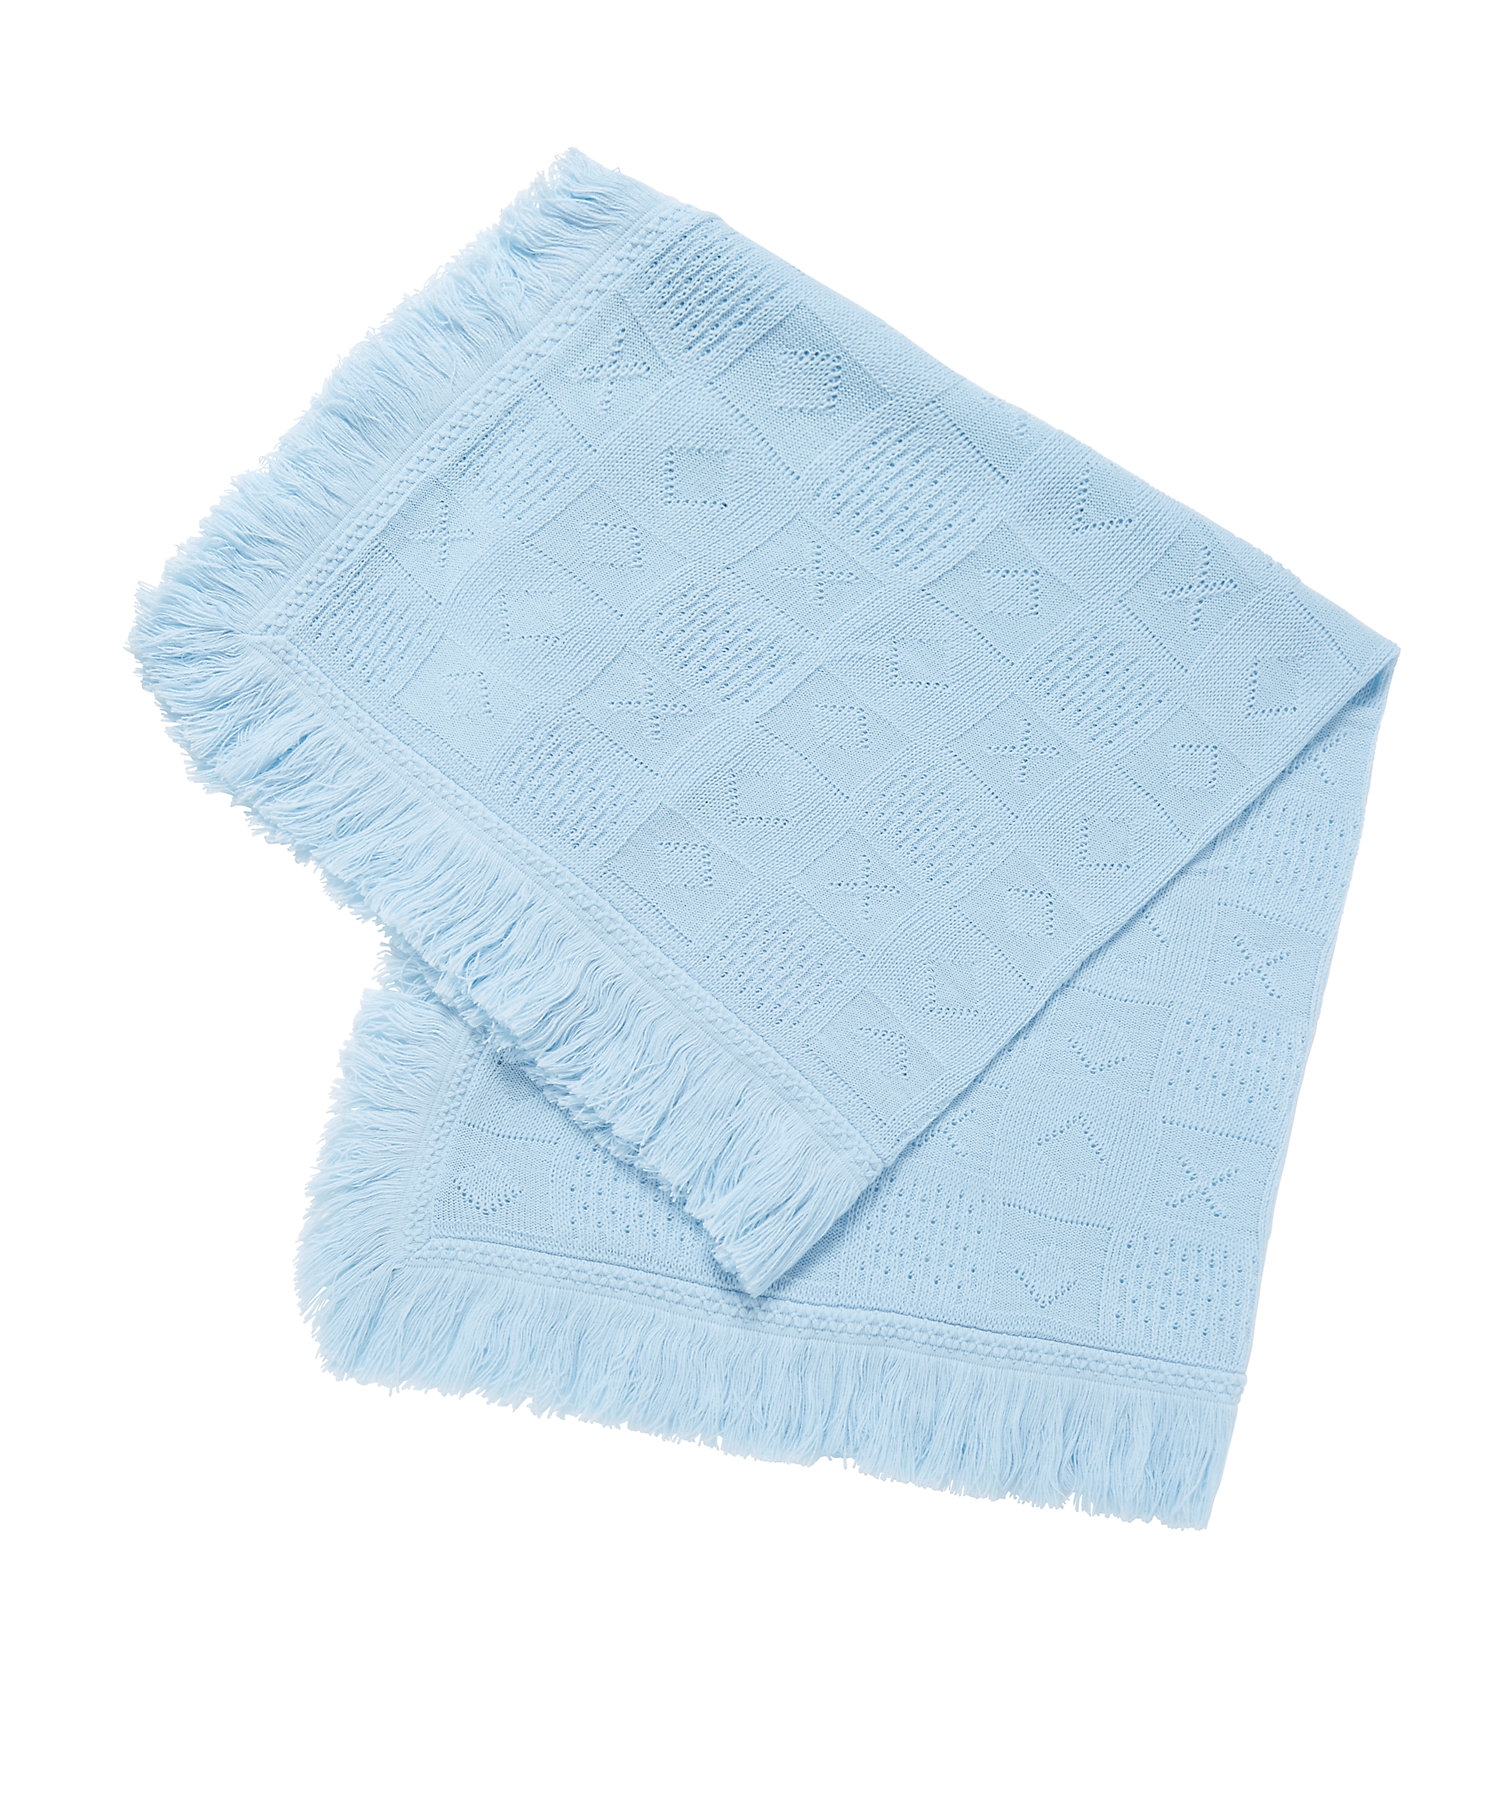 Mothercare | My First Fringe Knit Shawl - Blue